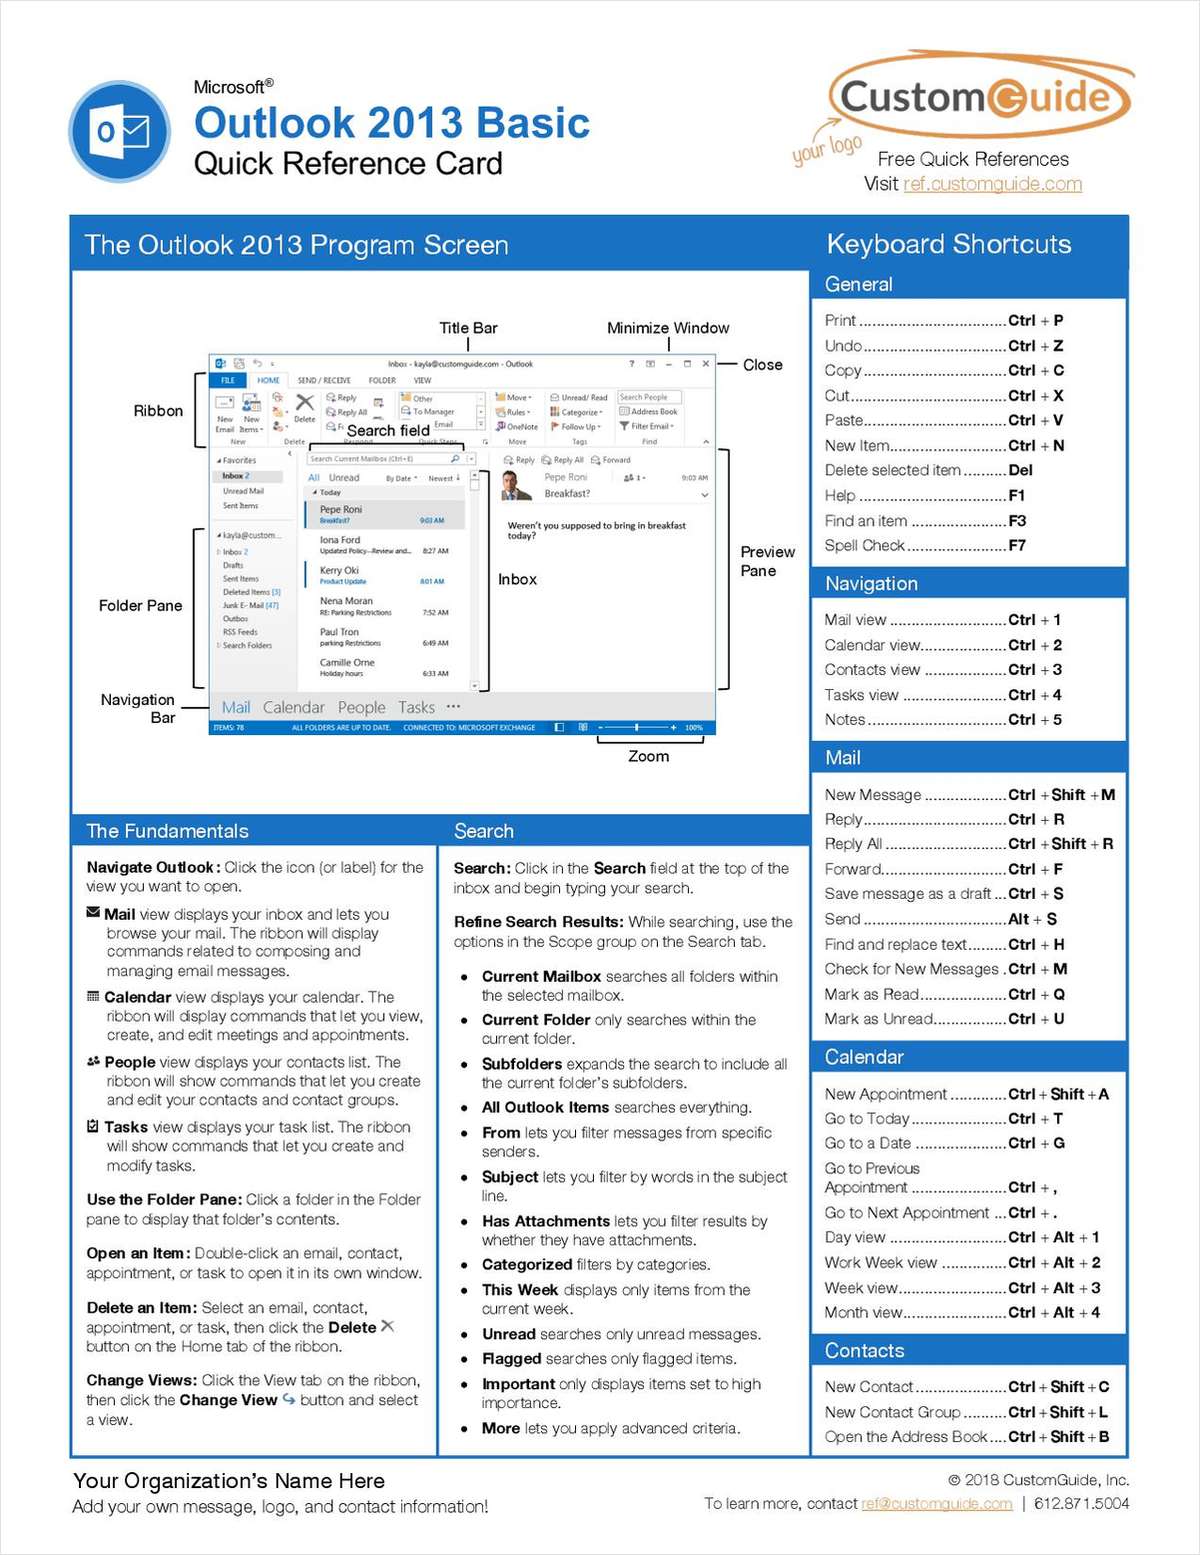 Microsoft Outlook 2013 Basic -- Free Quick Reference Card